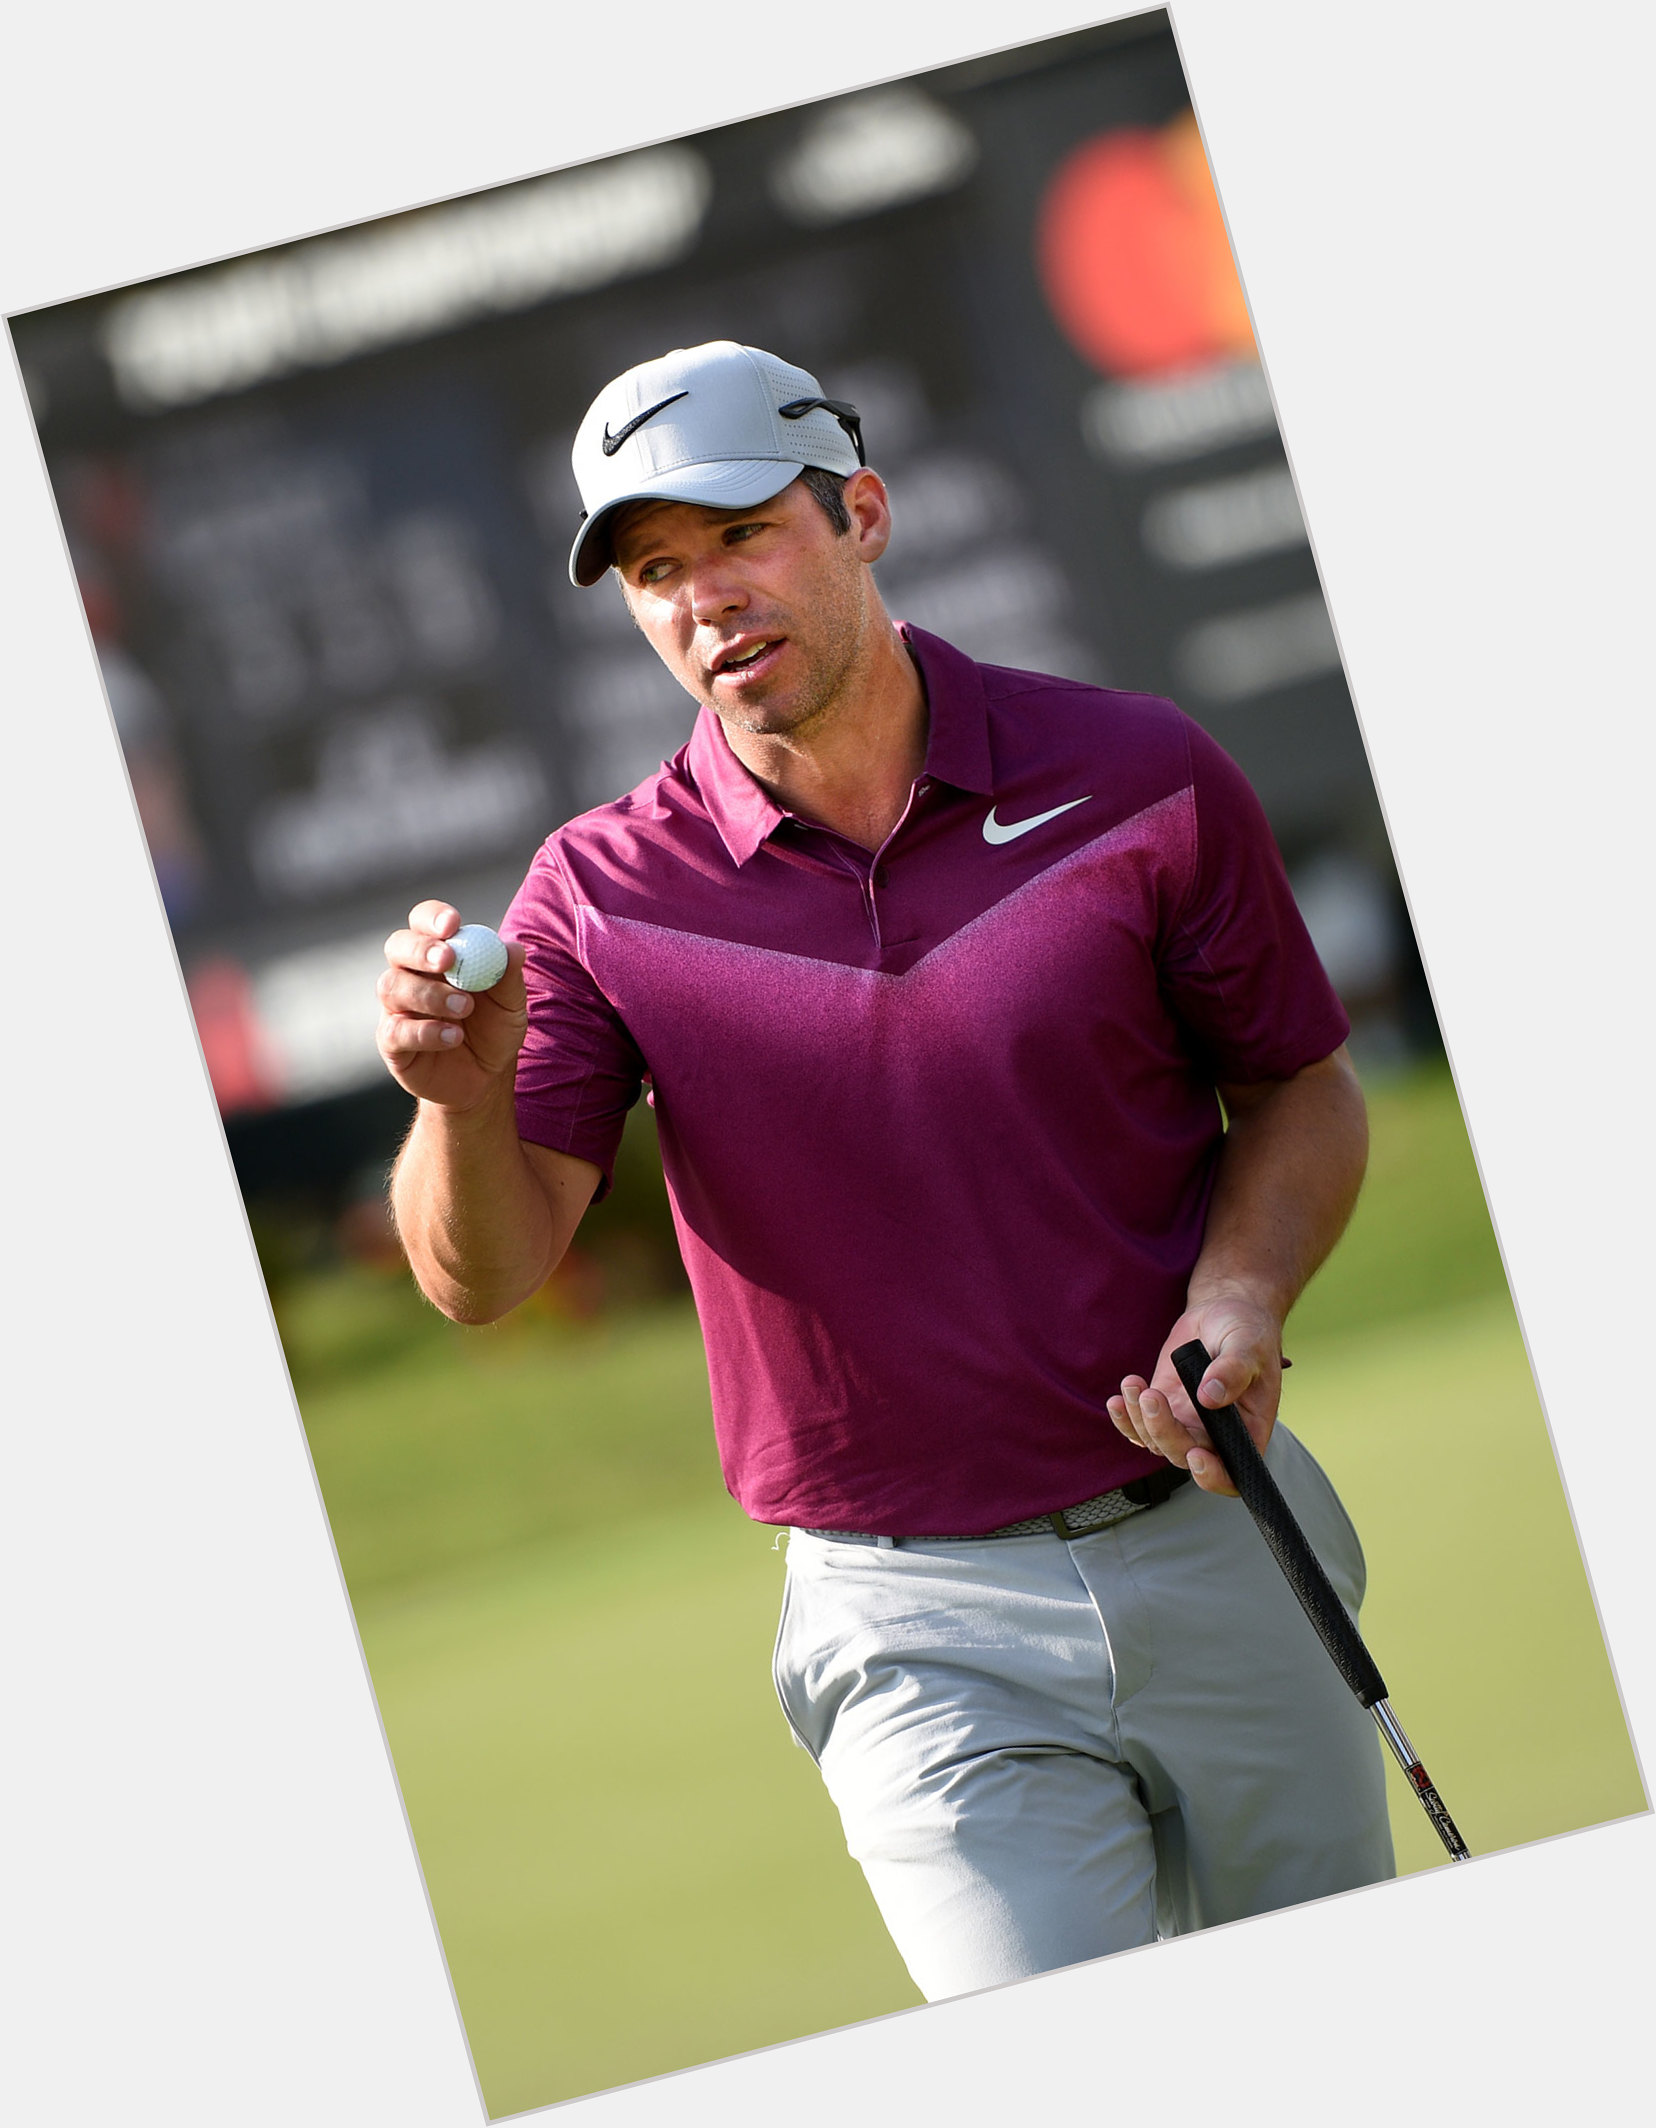 Http://fanpagepress.net/m/P/Paul Casey Hairstyle 3